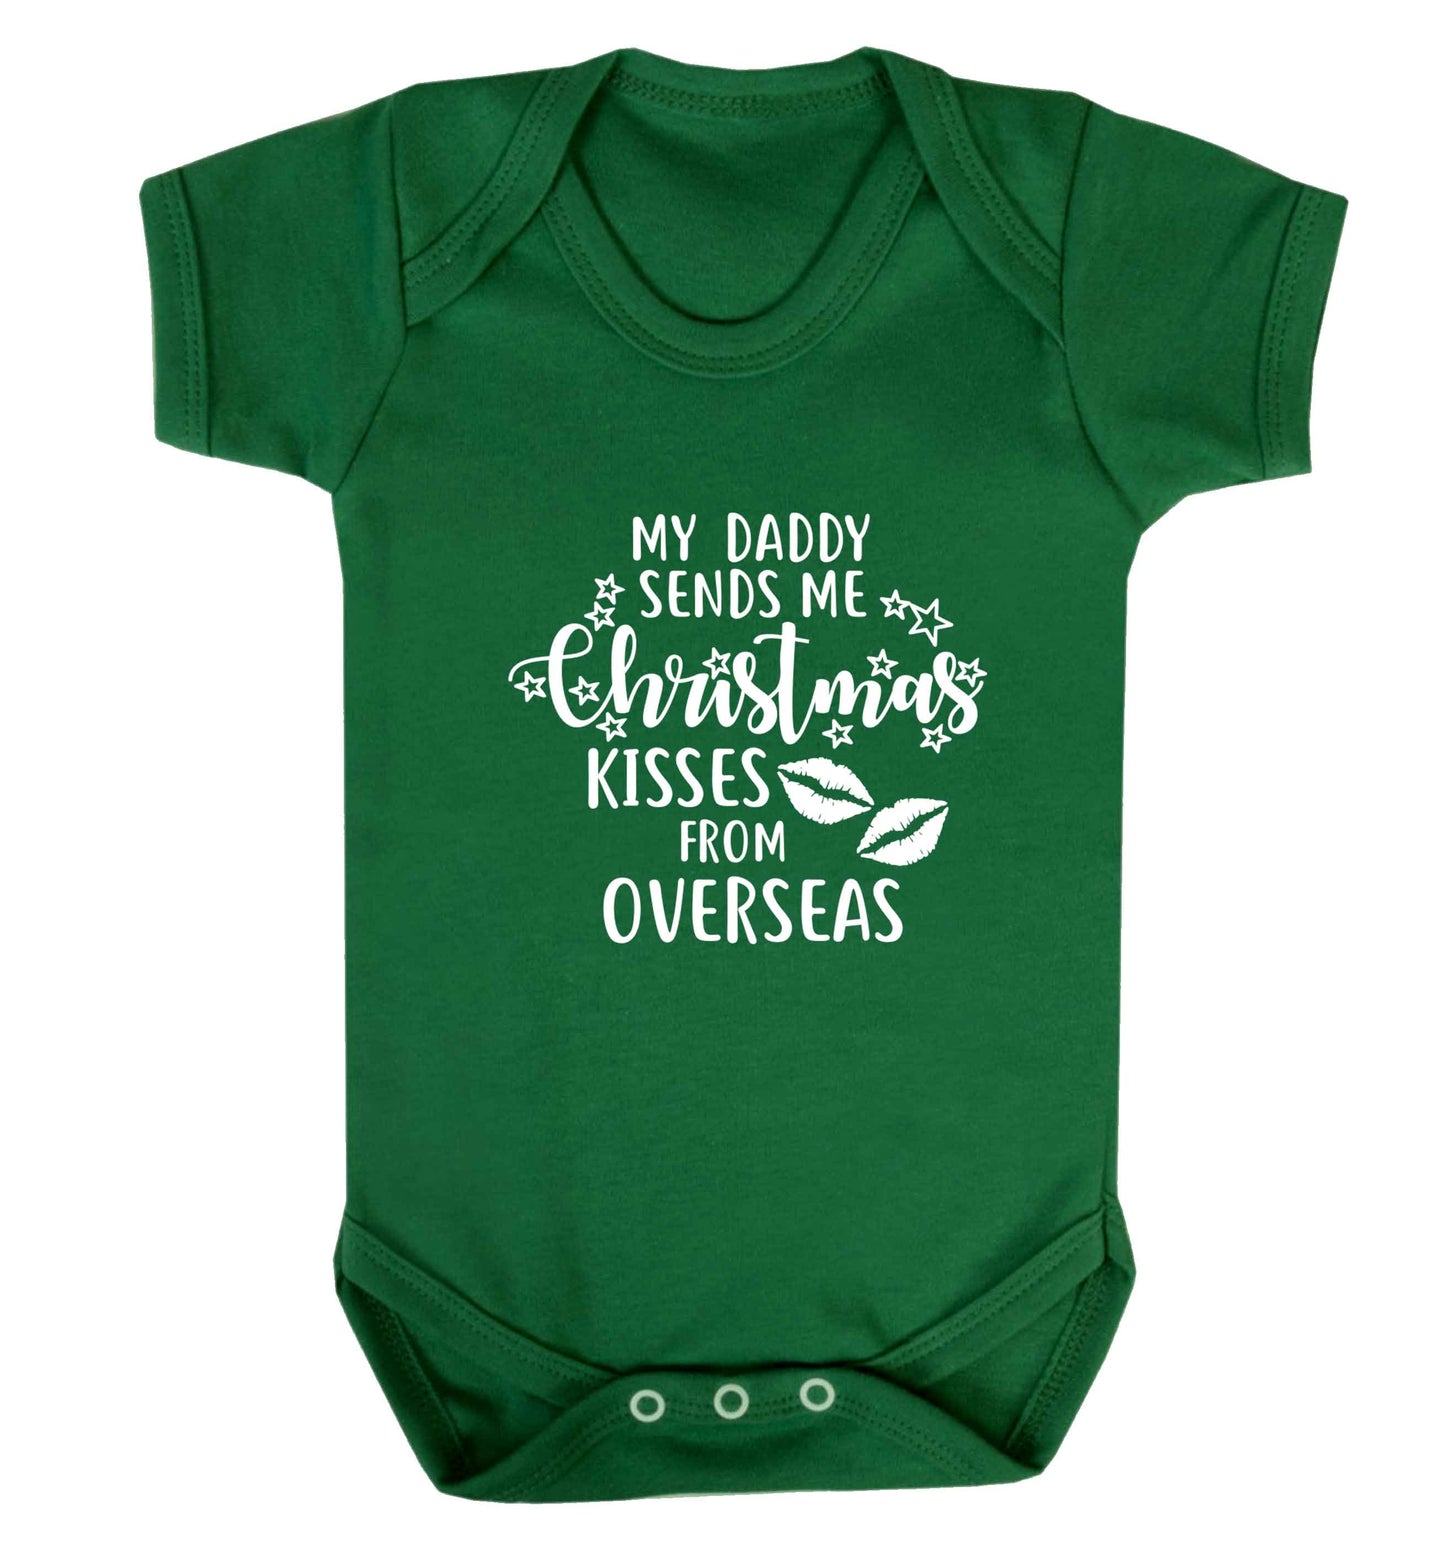 Daddy Christmas Kisses Overseas baby vest green 18-24 months